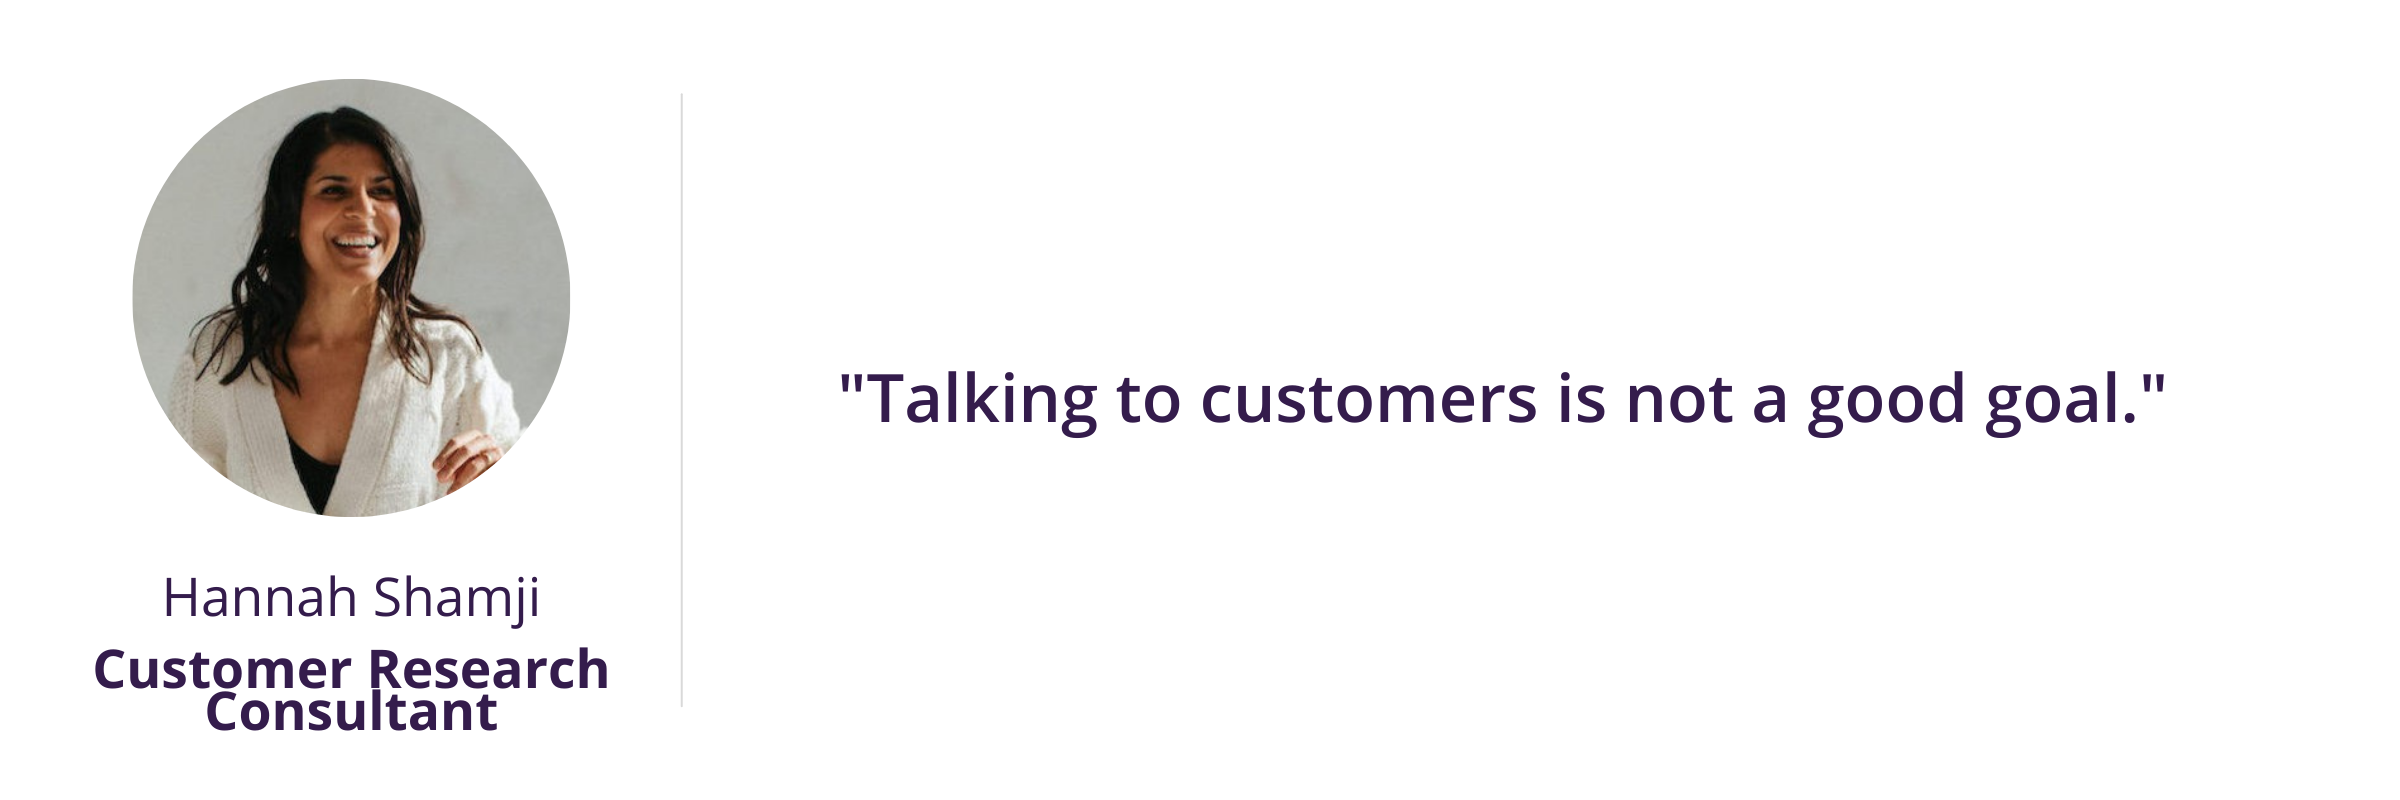 "Talking to customers is not a good goal."